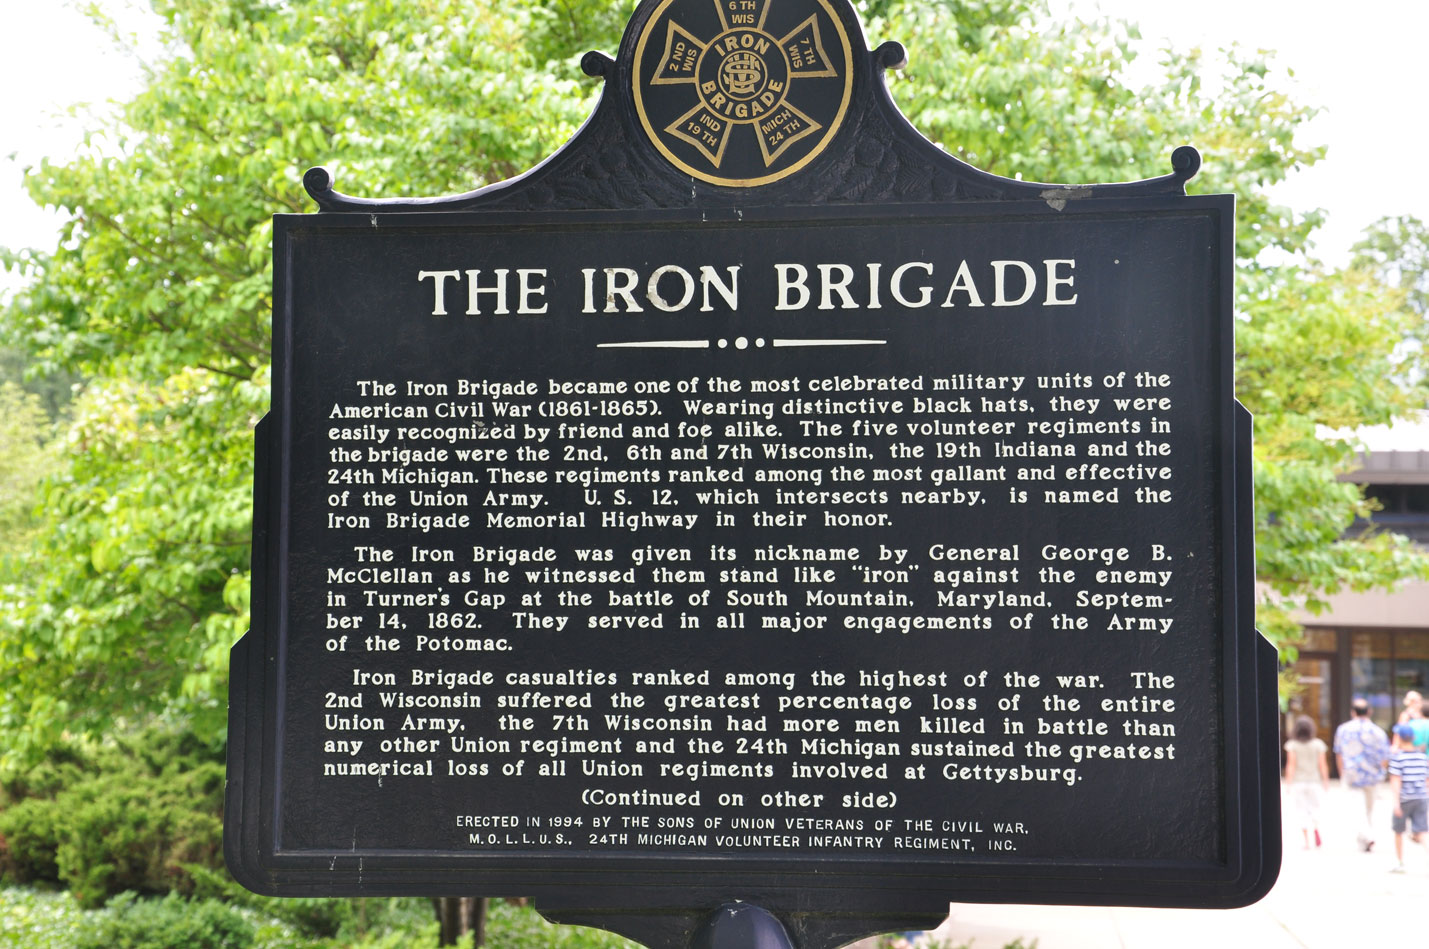 sign about The Iron Brigade